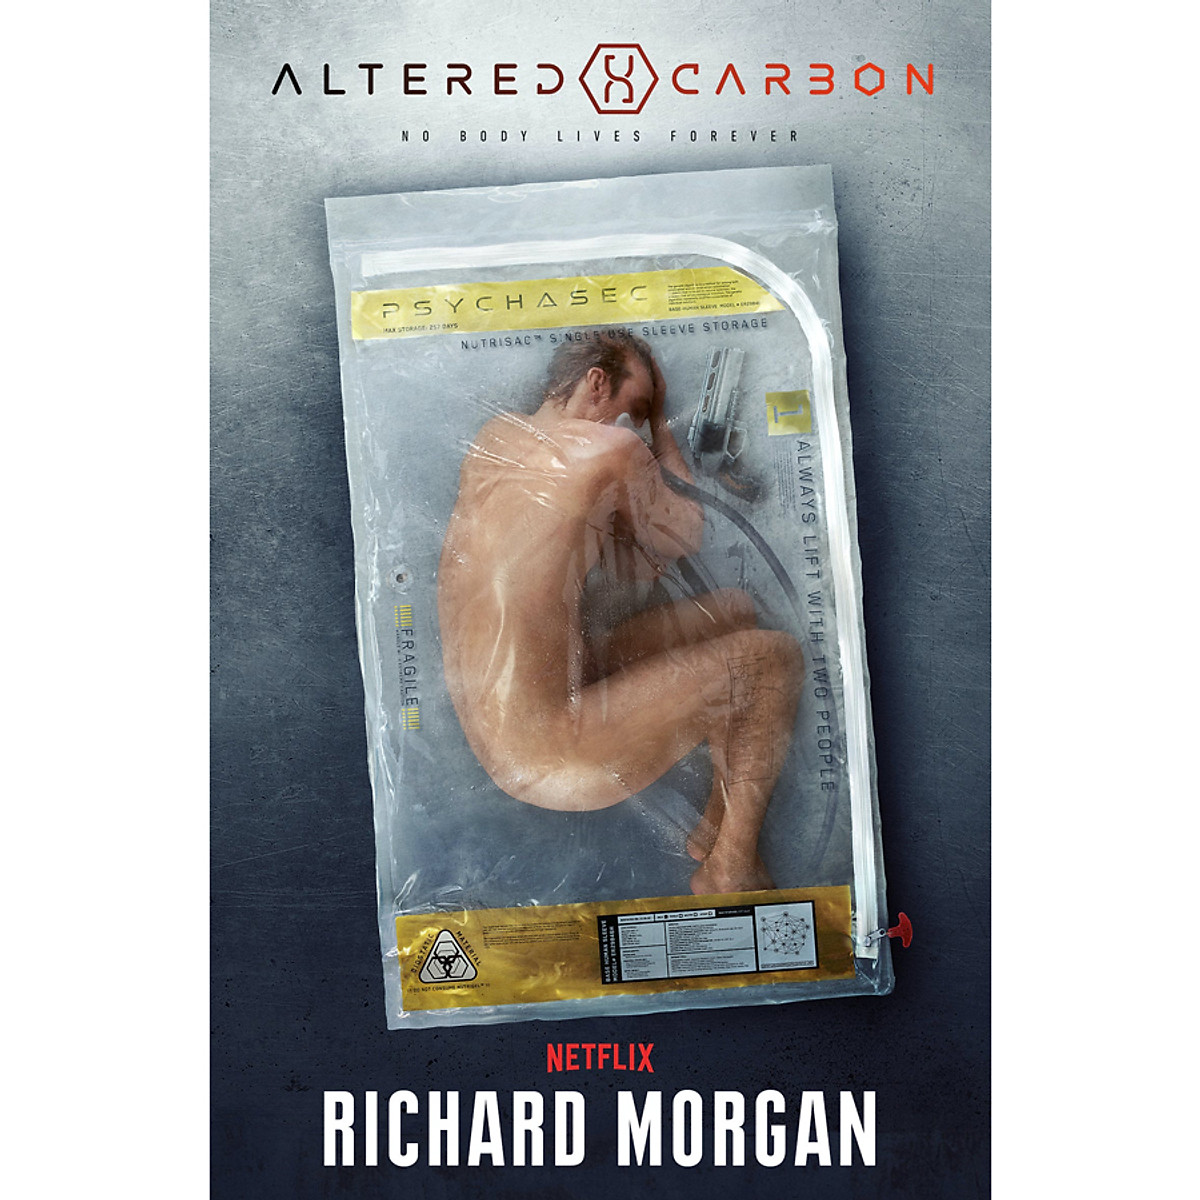 Altered Carbon: No Body Lives Forever (Book 1 of 3 in the Takeshi Kovacs Novels Series) (Major New Netflix Series)